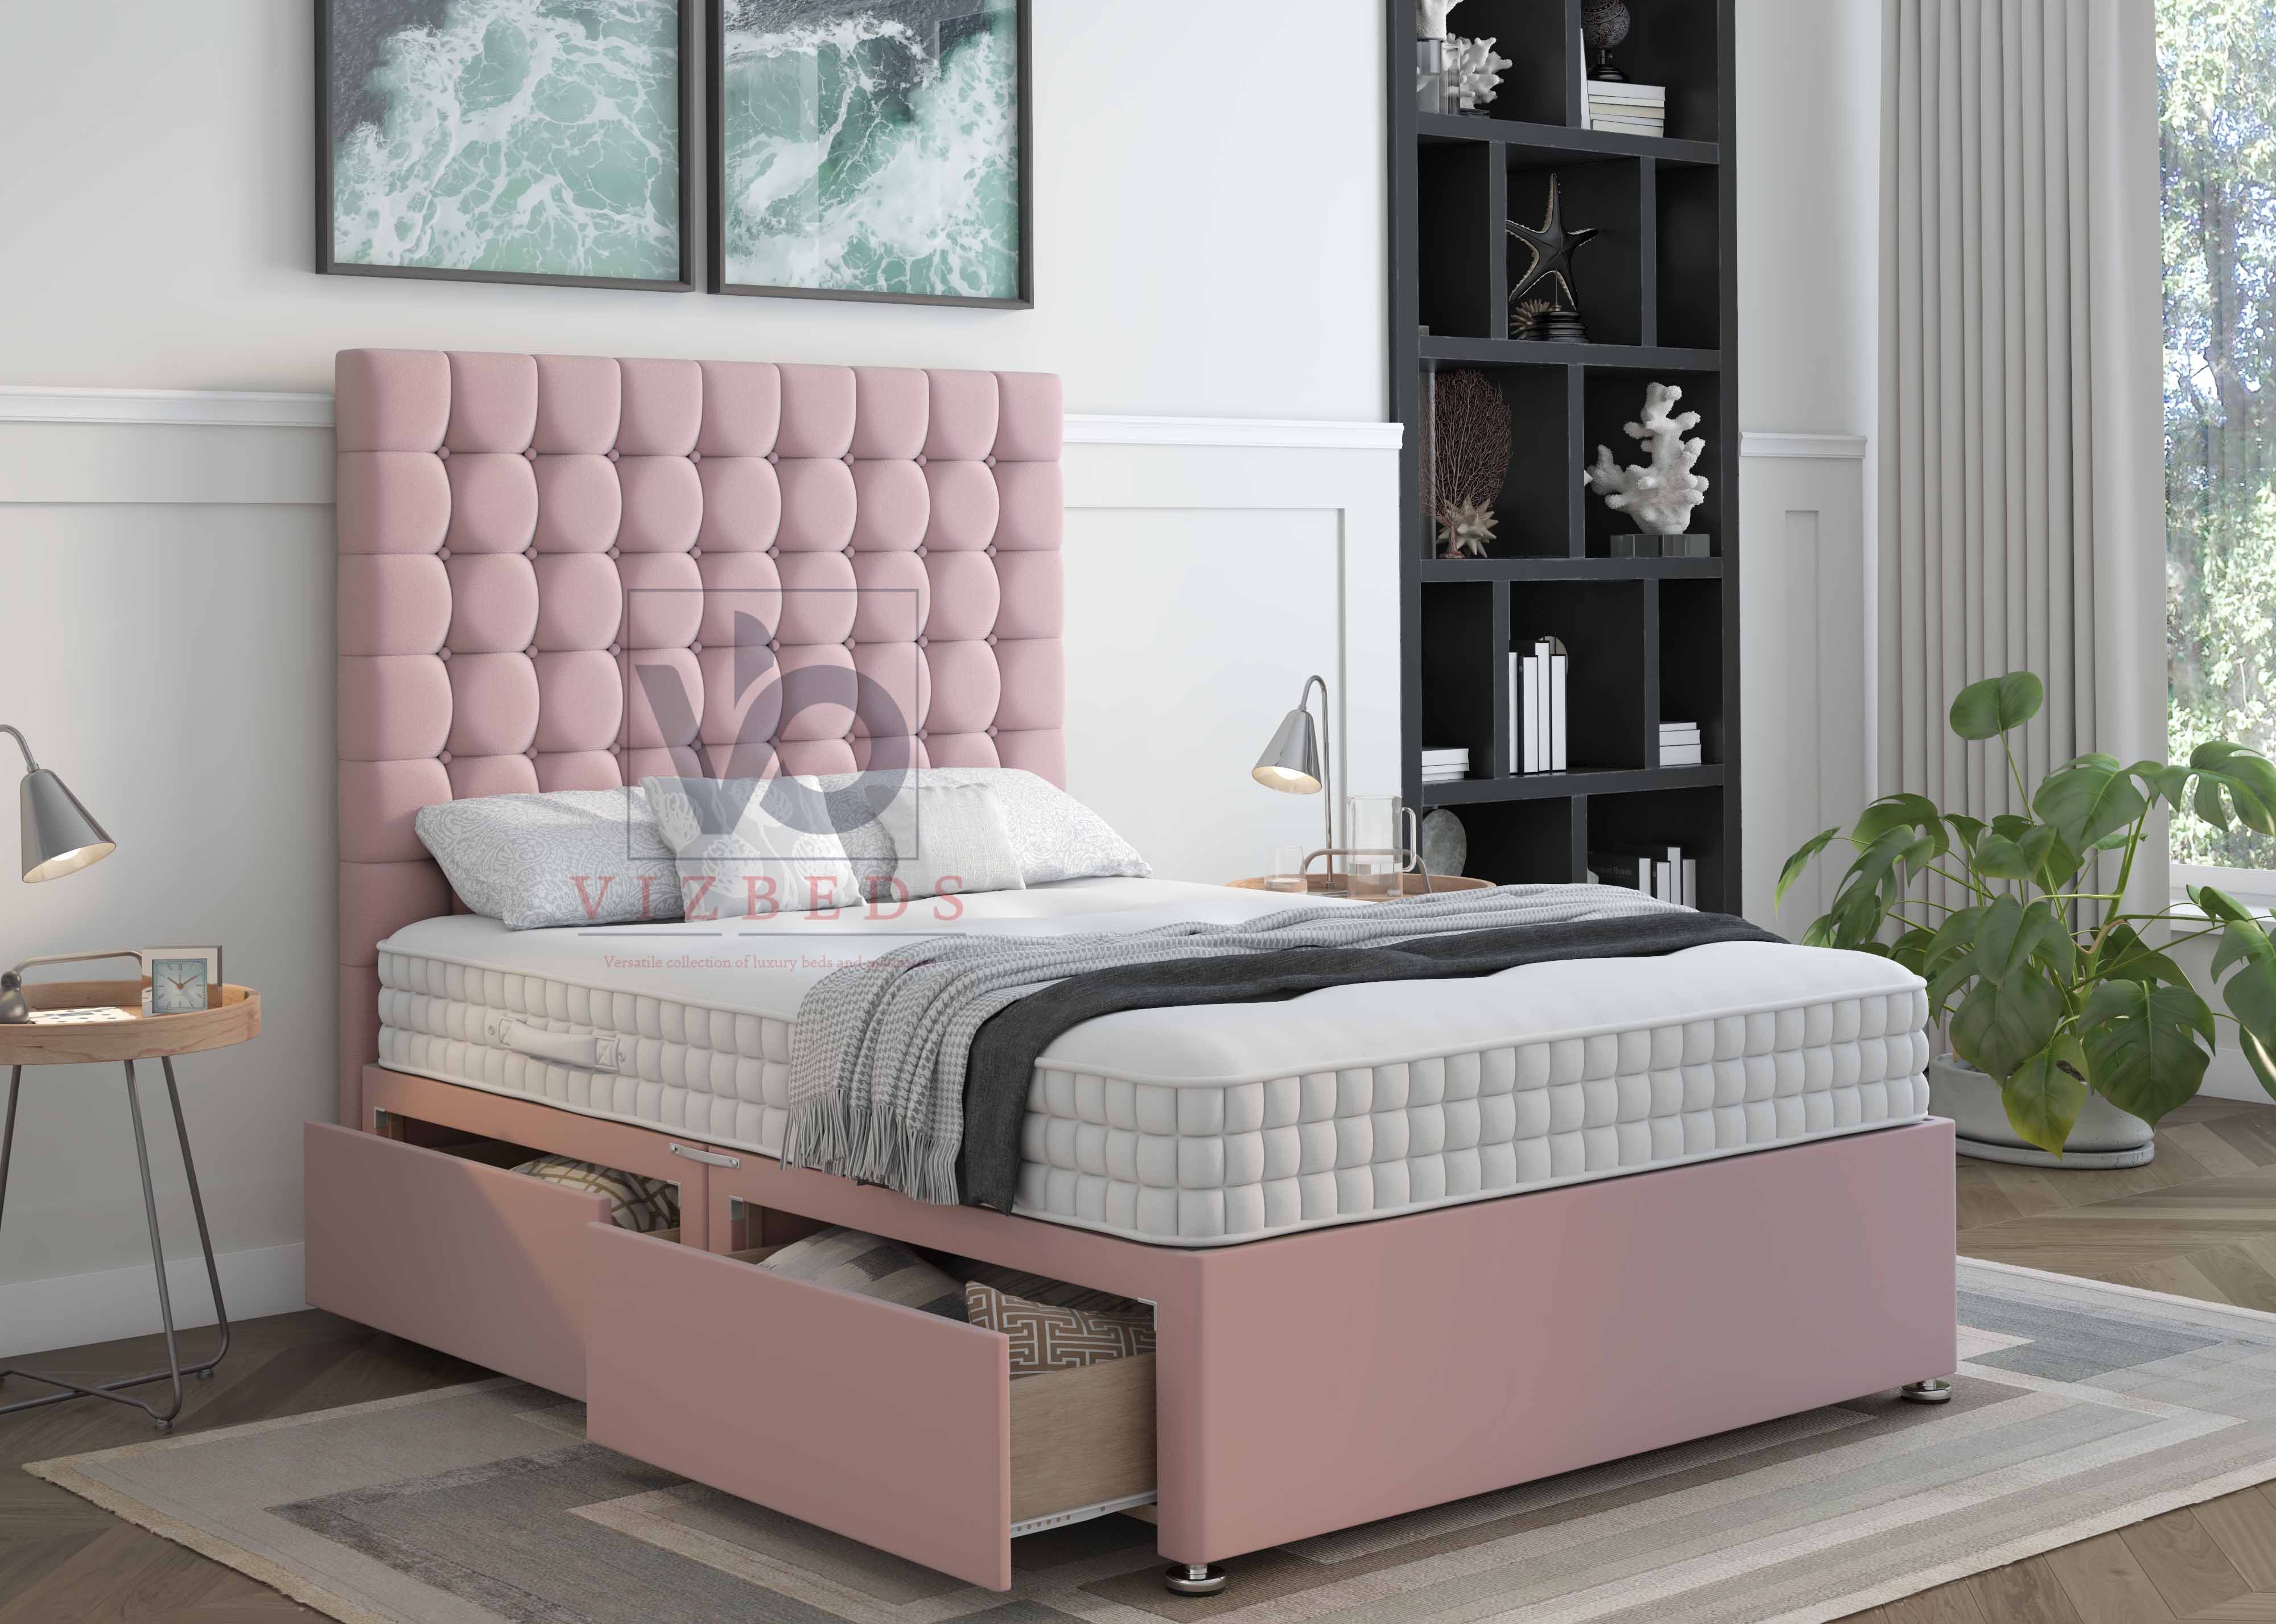 The Grotto Divan Bed Set With Luxury Headboard